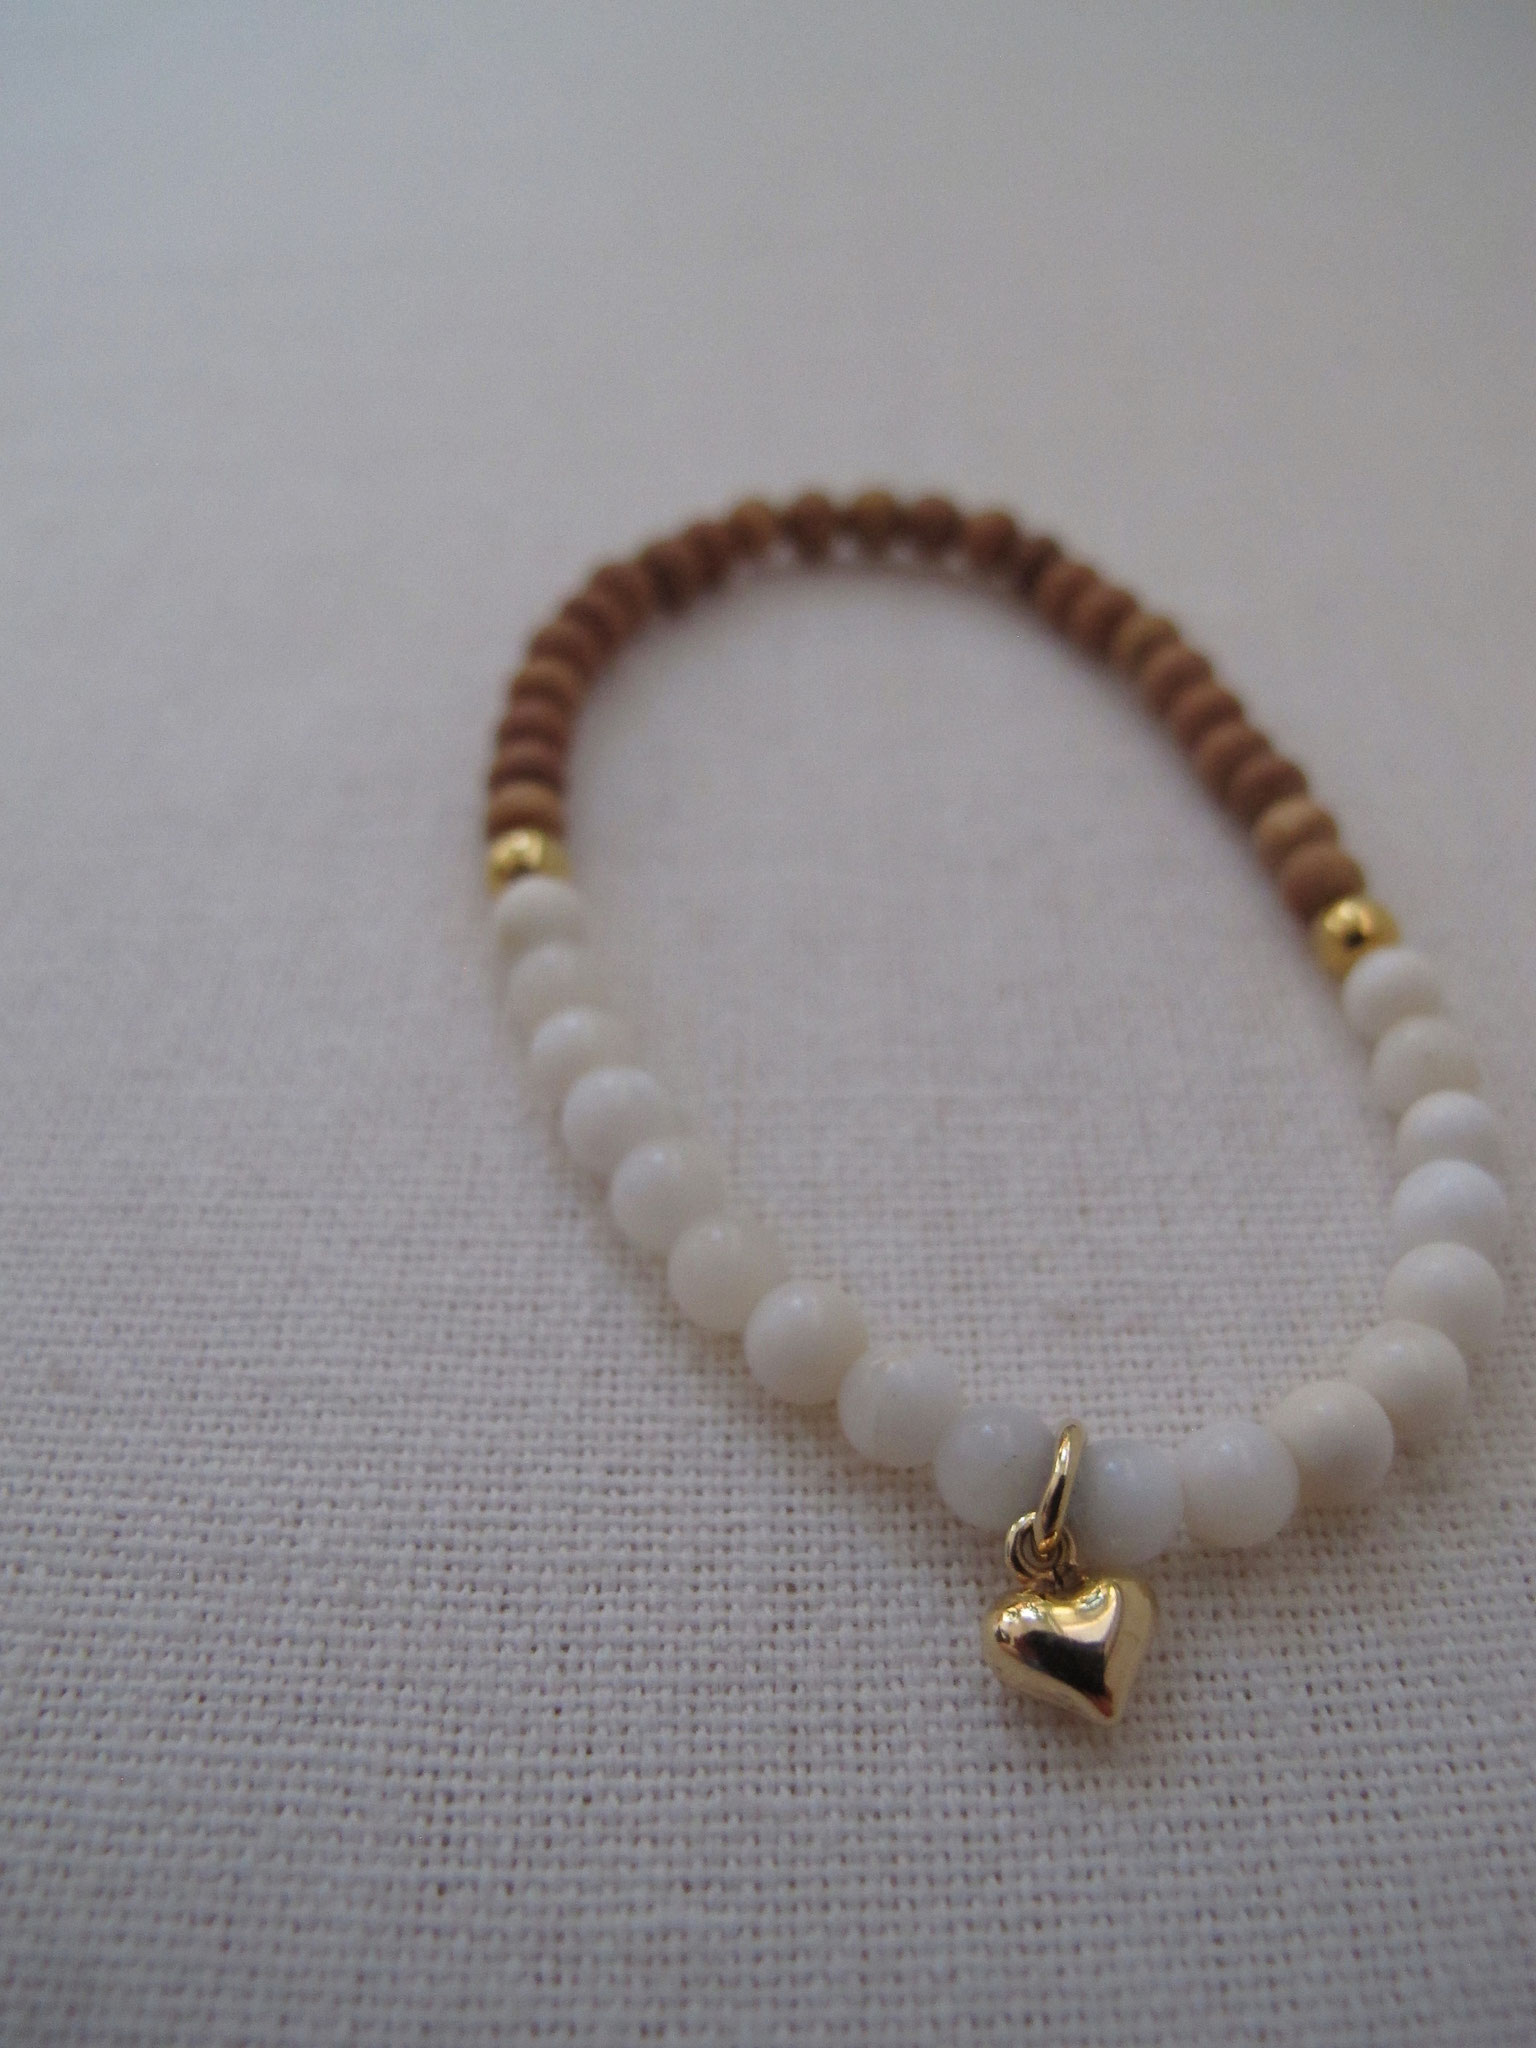 Gorgeous white opal in combination with sandal wood with gold-plated heart charm (sold)